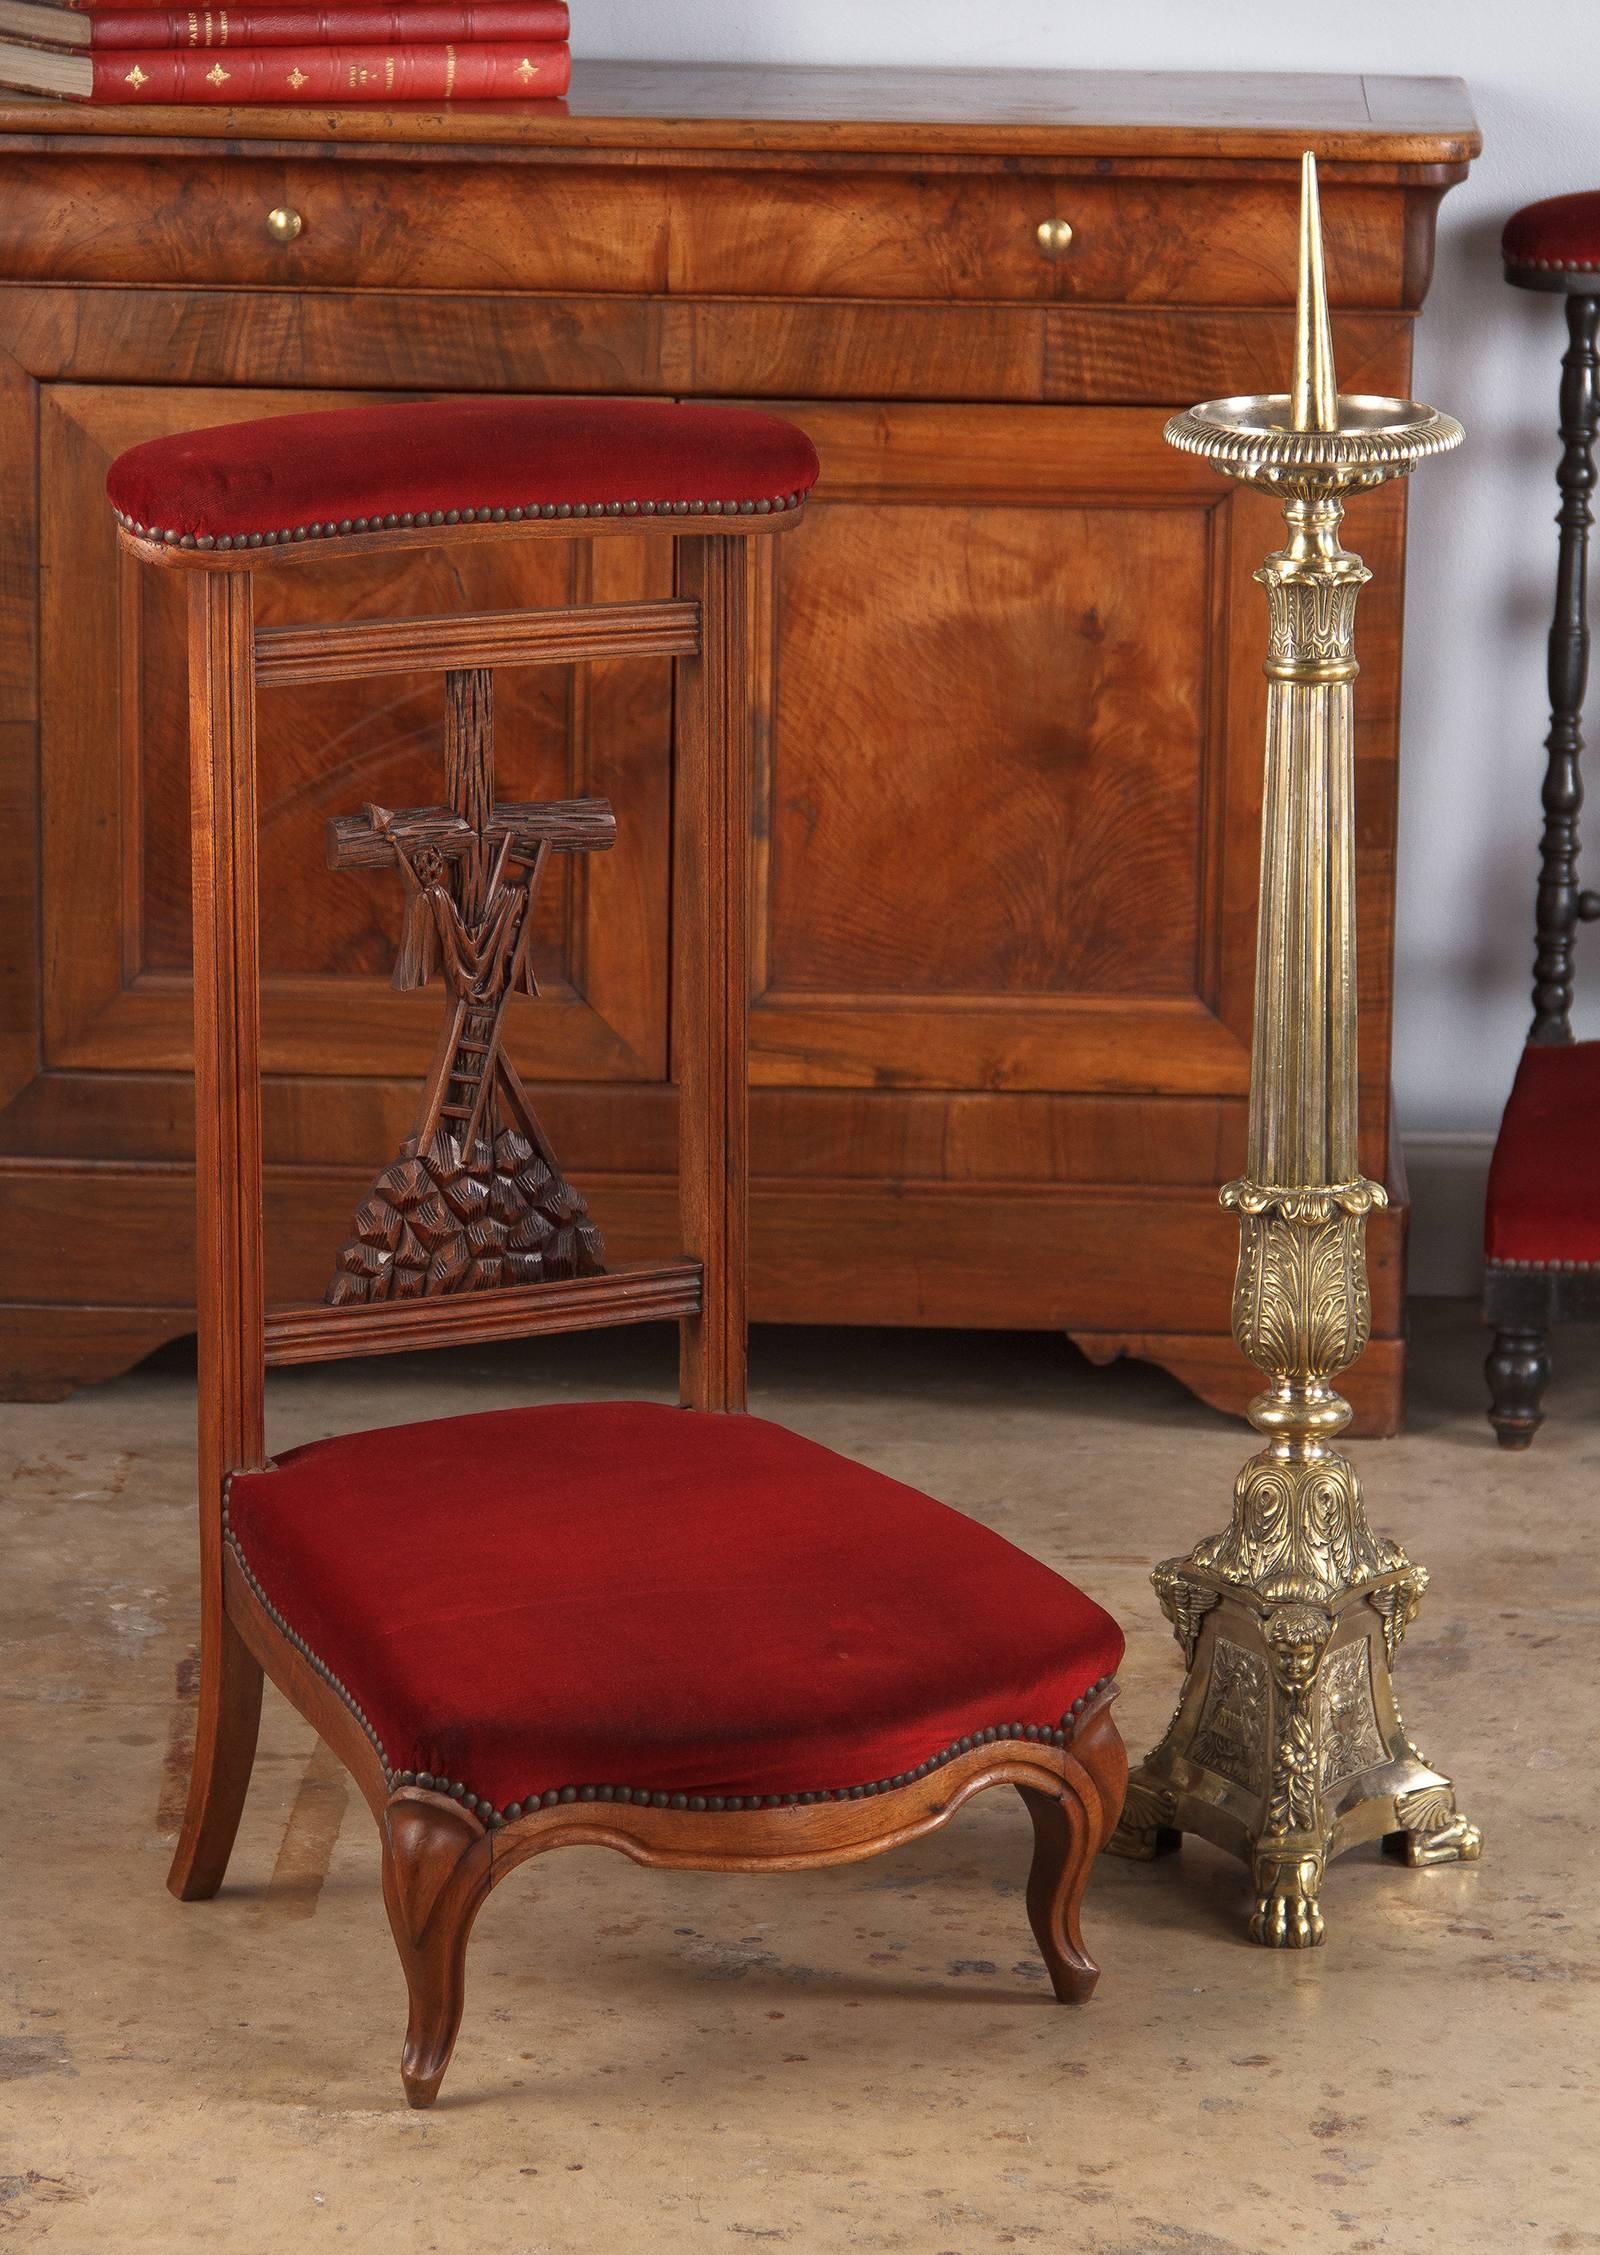 A pious Louis Philippe prie dieu, prayer chair, in walnut and red velvet, circa mid-1800s. The chair's focal point is a carved back piece displaying the cross after Christ's removal, the spear and ladder are propped up against it. Molded frame